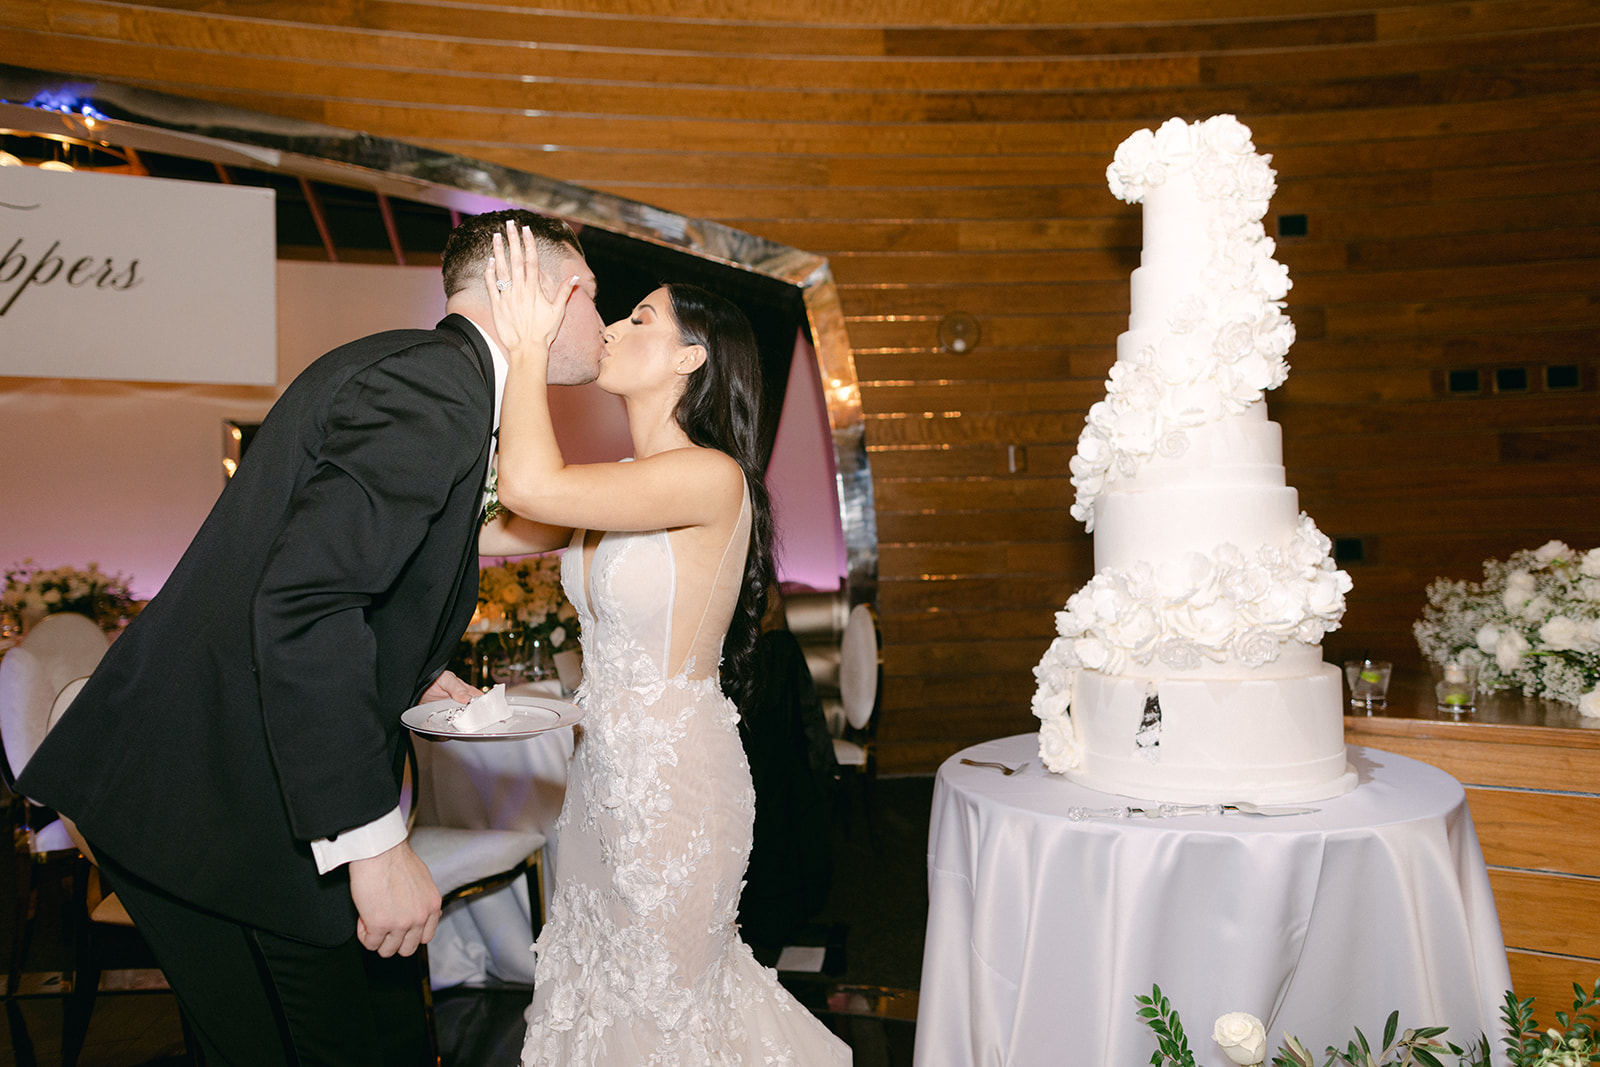 Couple kissing after cutting cake at reception 